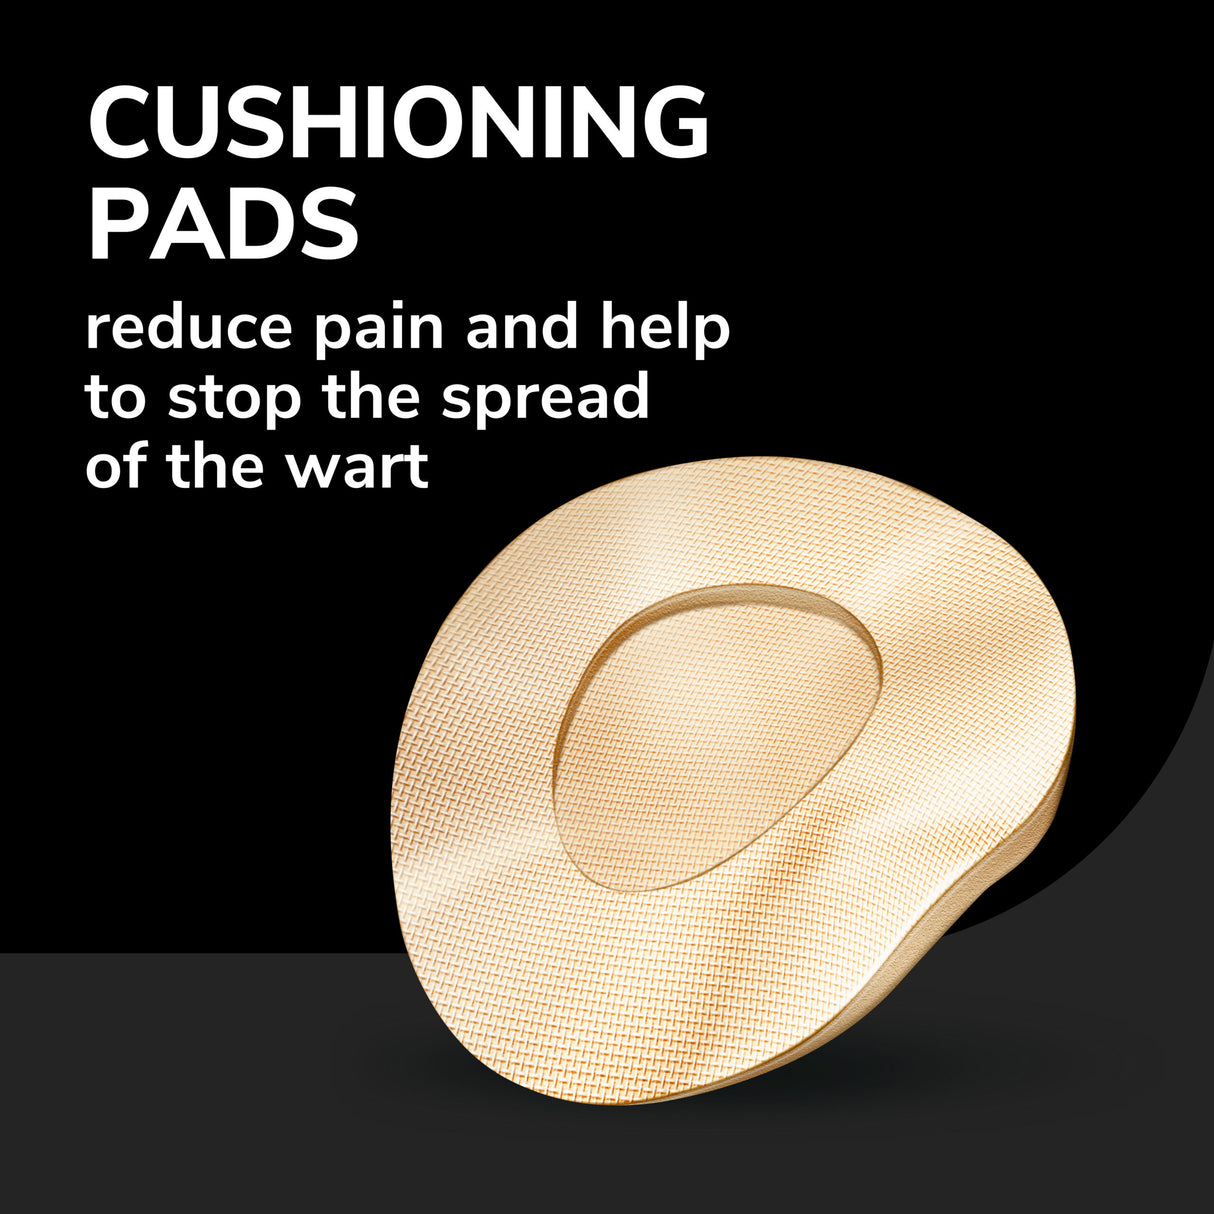 image of cushioning pads reduce pain and help to stop the spread of the wart